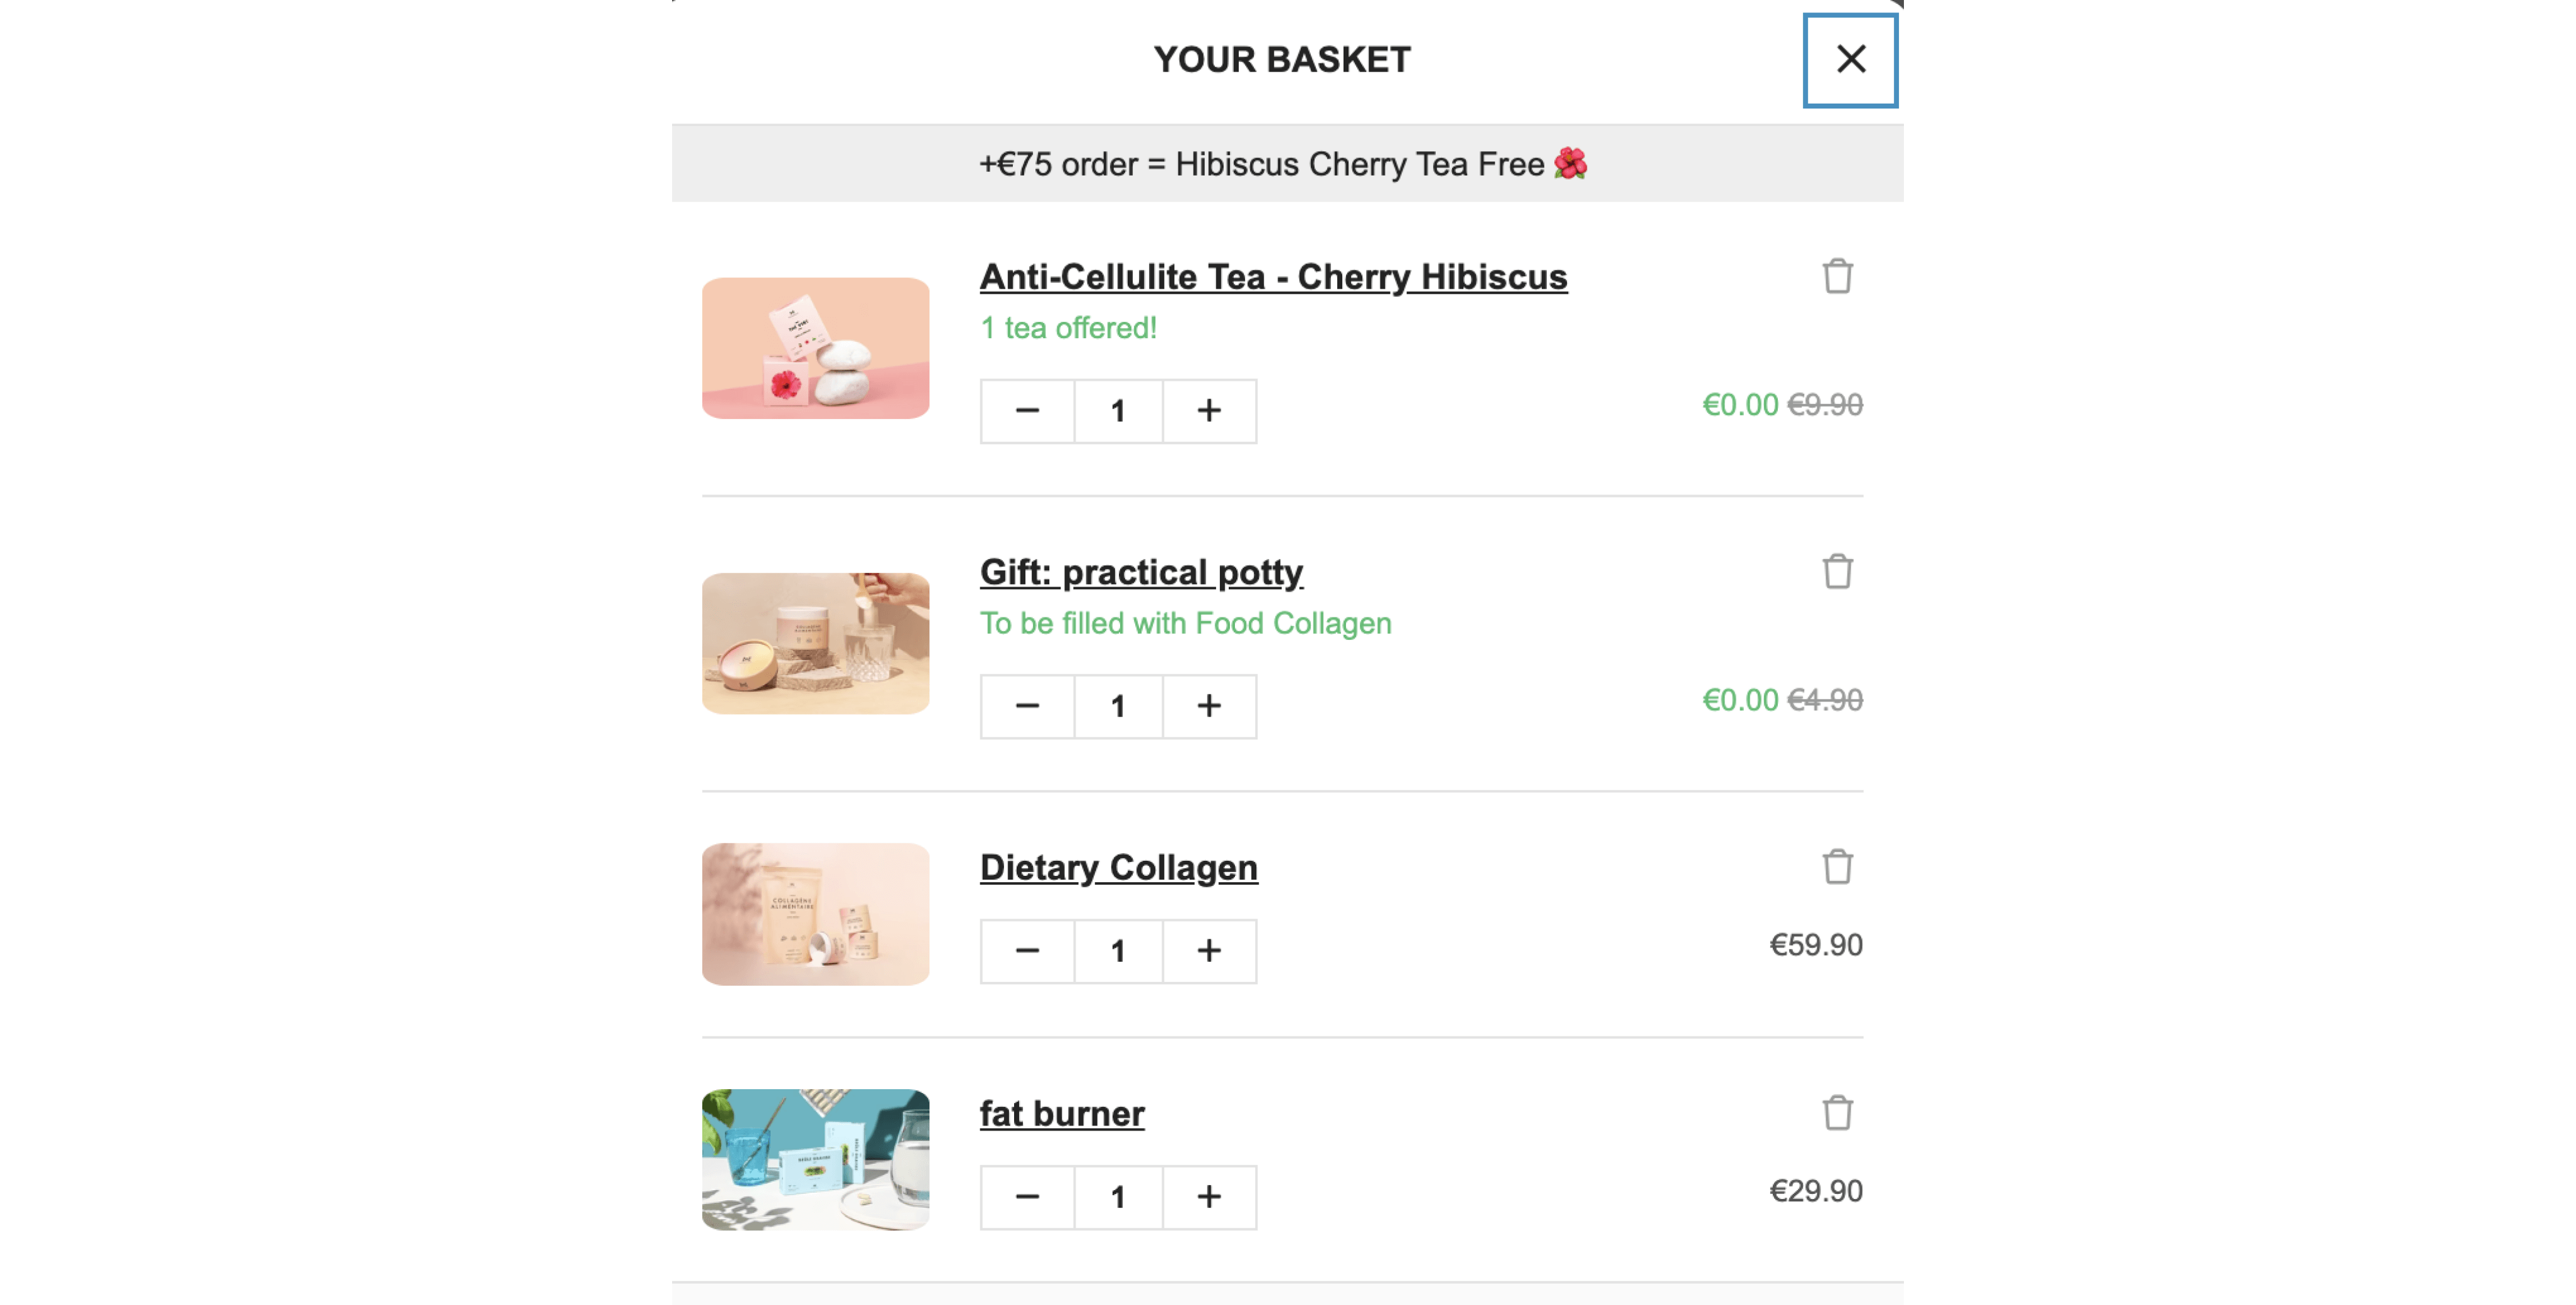 A screenshot of the basket page on Miniweight’s website. In this image, the customer has added the Fat Burner and Dietary Collagen products to their cart and was rewarded with the Anti-Cellulite Tea and Practical Potty as a gift. 